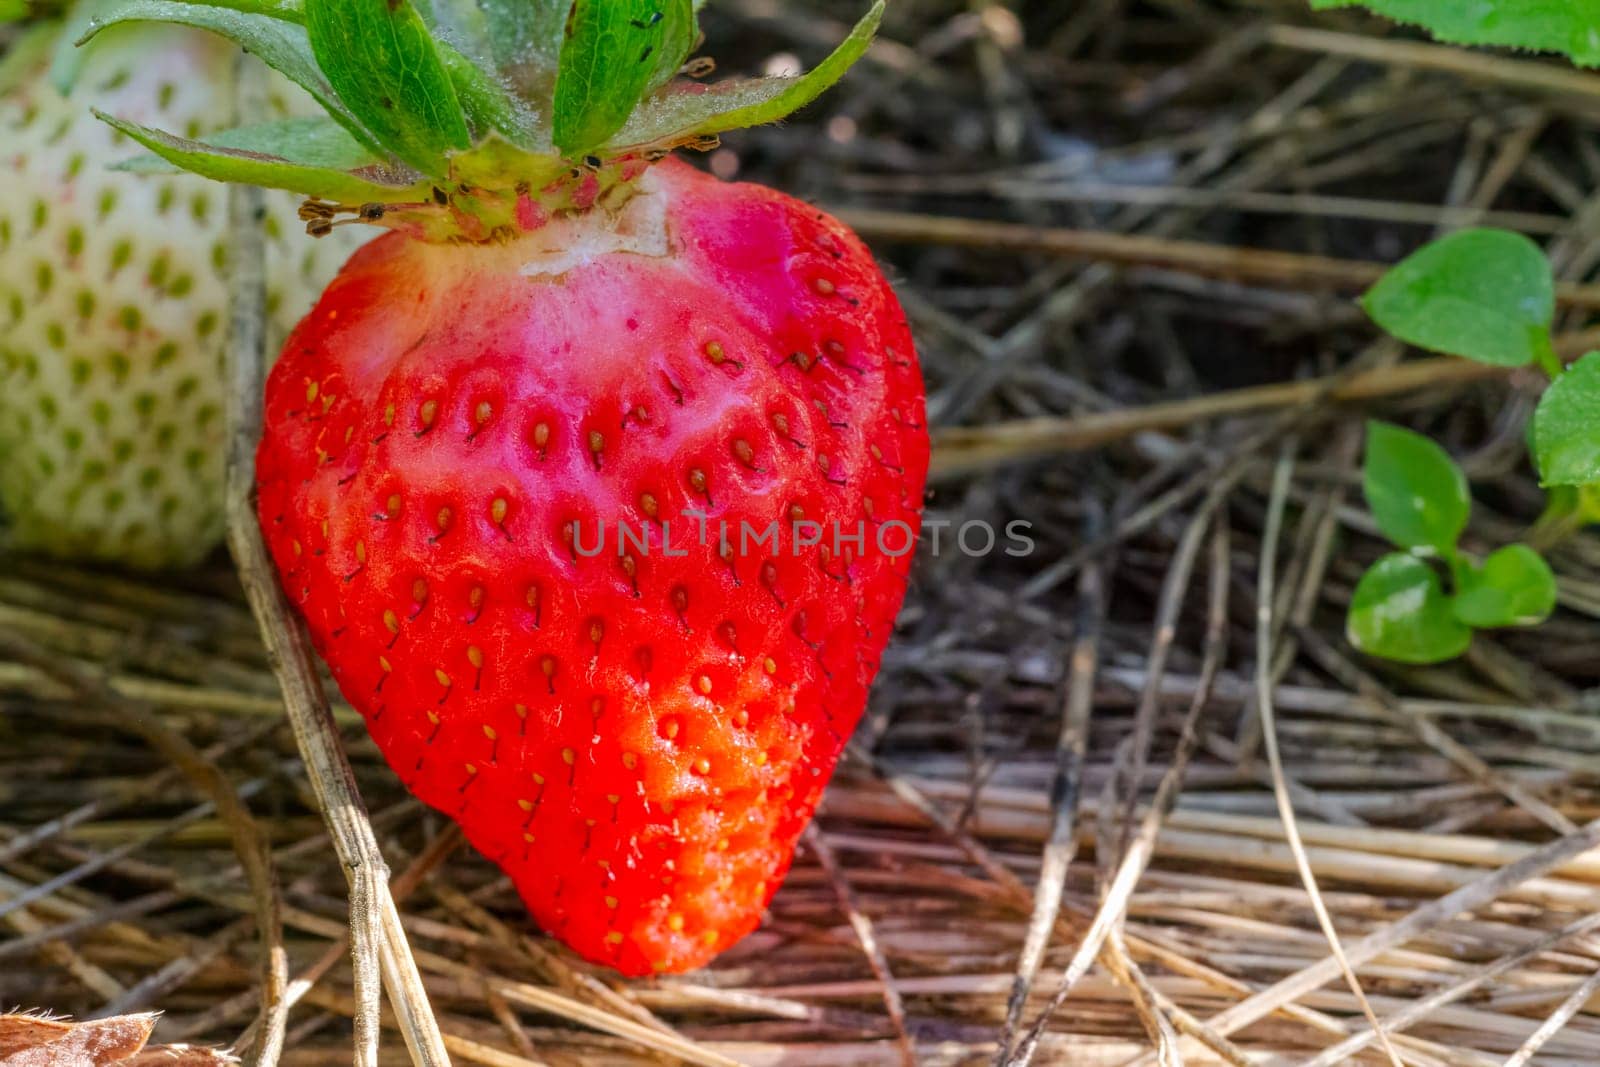 Red ripe strawberry on the garden bed. by mvg6894